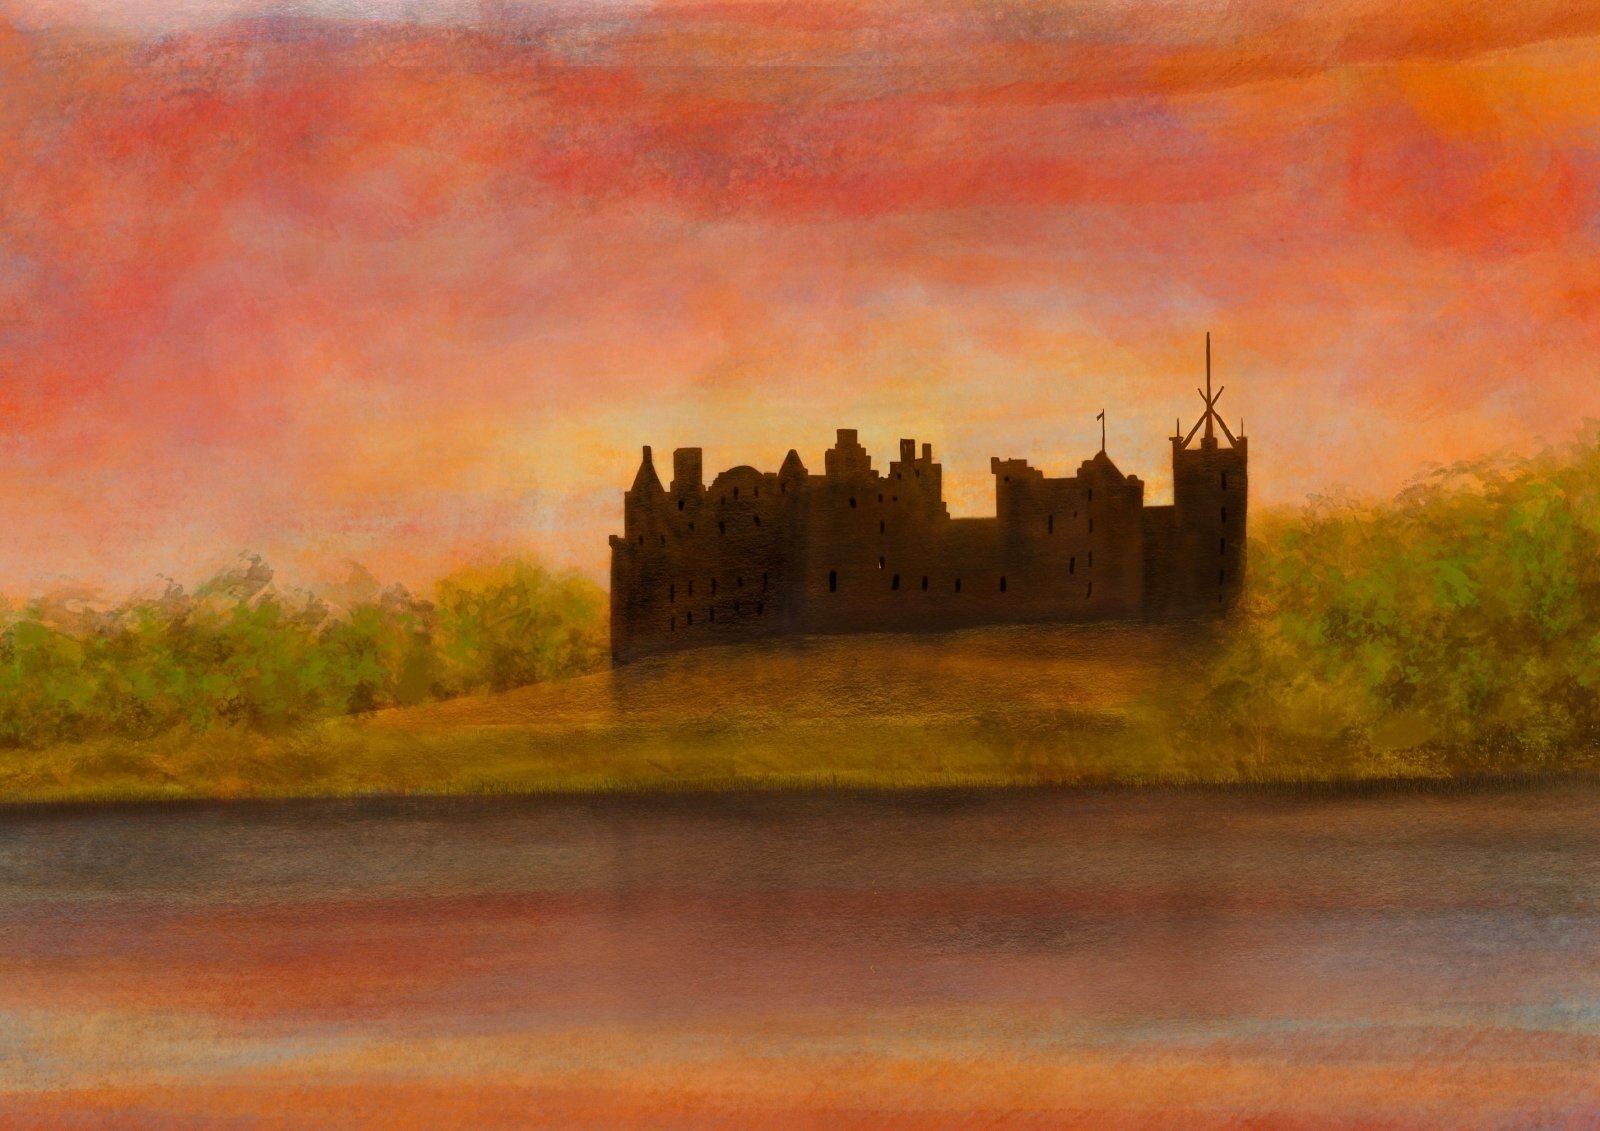 Linlithgow Palace Dusk-Signed Art Prints By Scottish Artist Hunter-Historic & Iconic Scotland Art Gallery-Paintings, Prints, Homeware, Art Gifts From Scotland By Scottish Artist Kevin Hunter